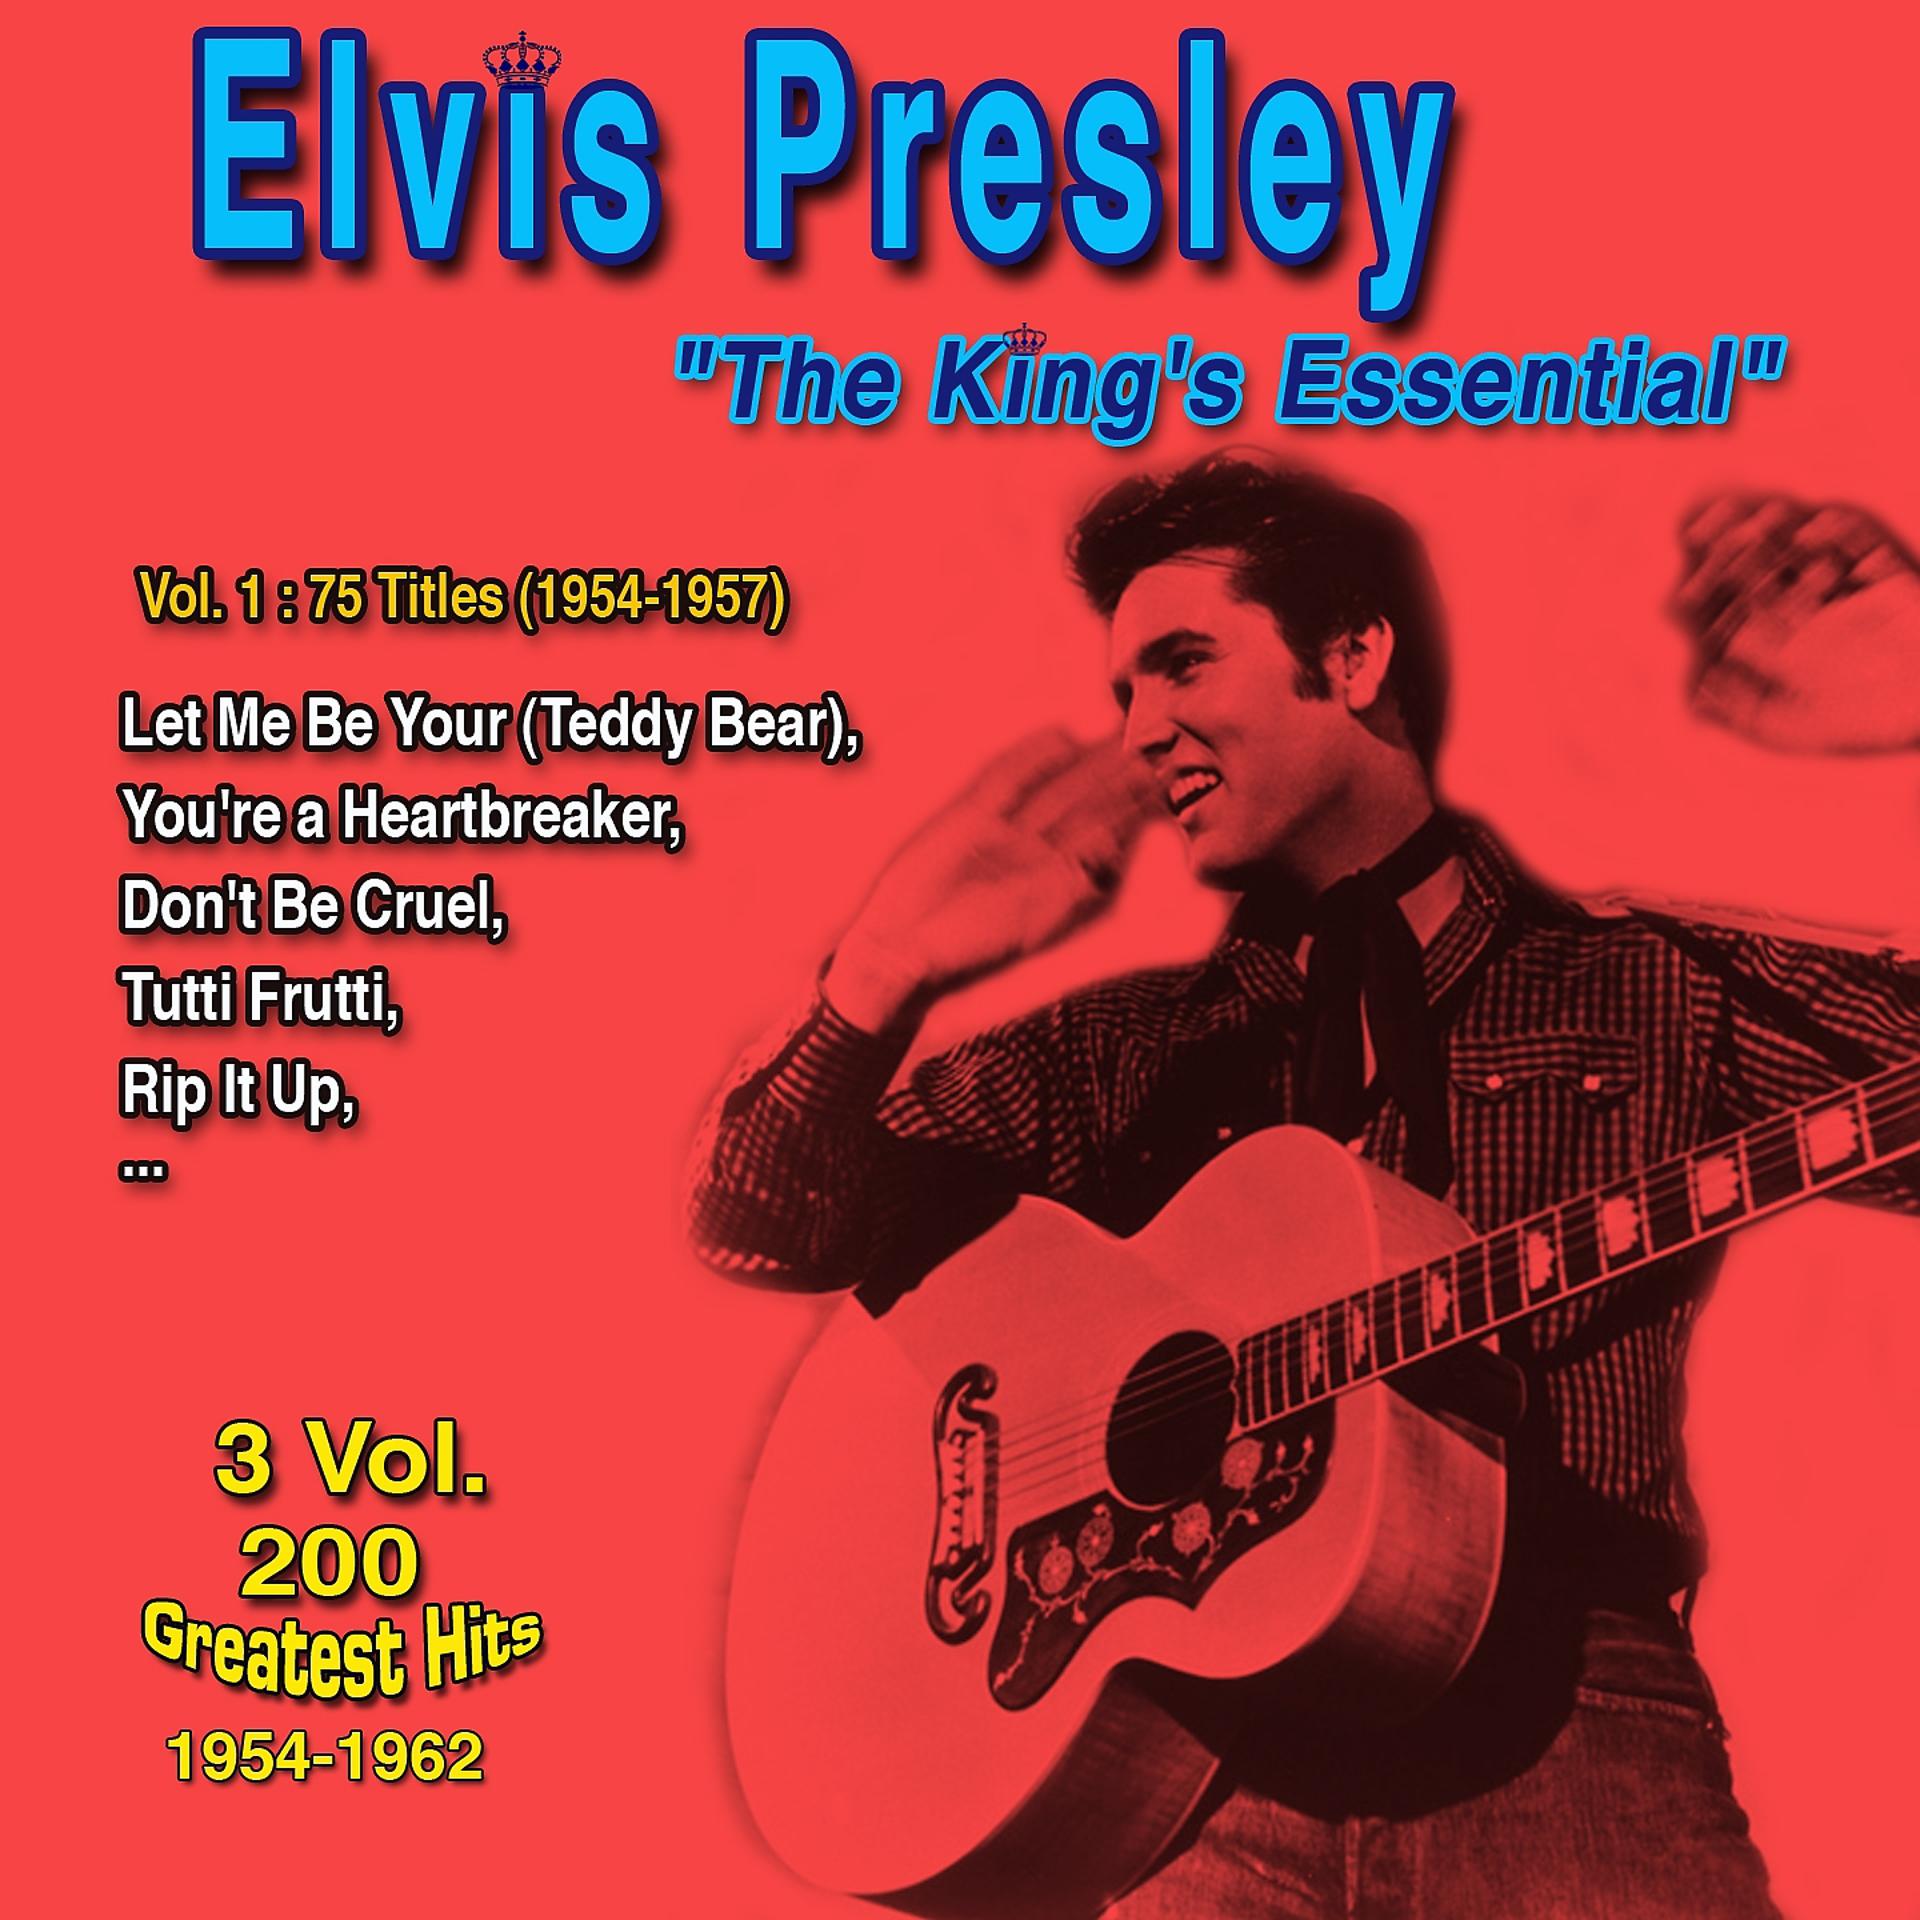 Постер альбома Elvis Presley: "The Essential of The King" - 3 Vol. 200 Greatest Hits 1954-1962